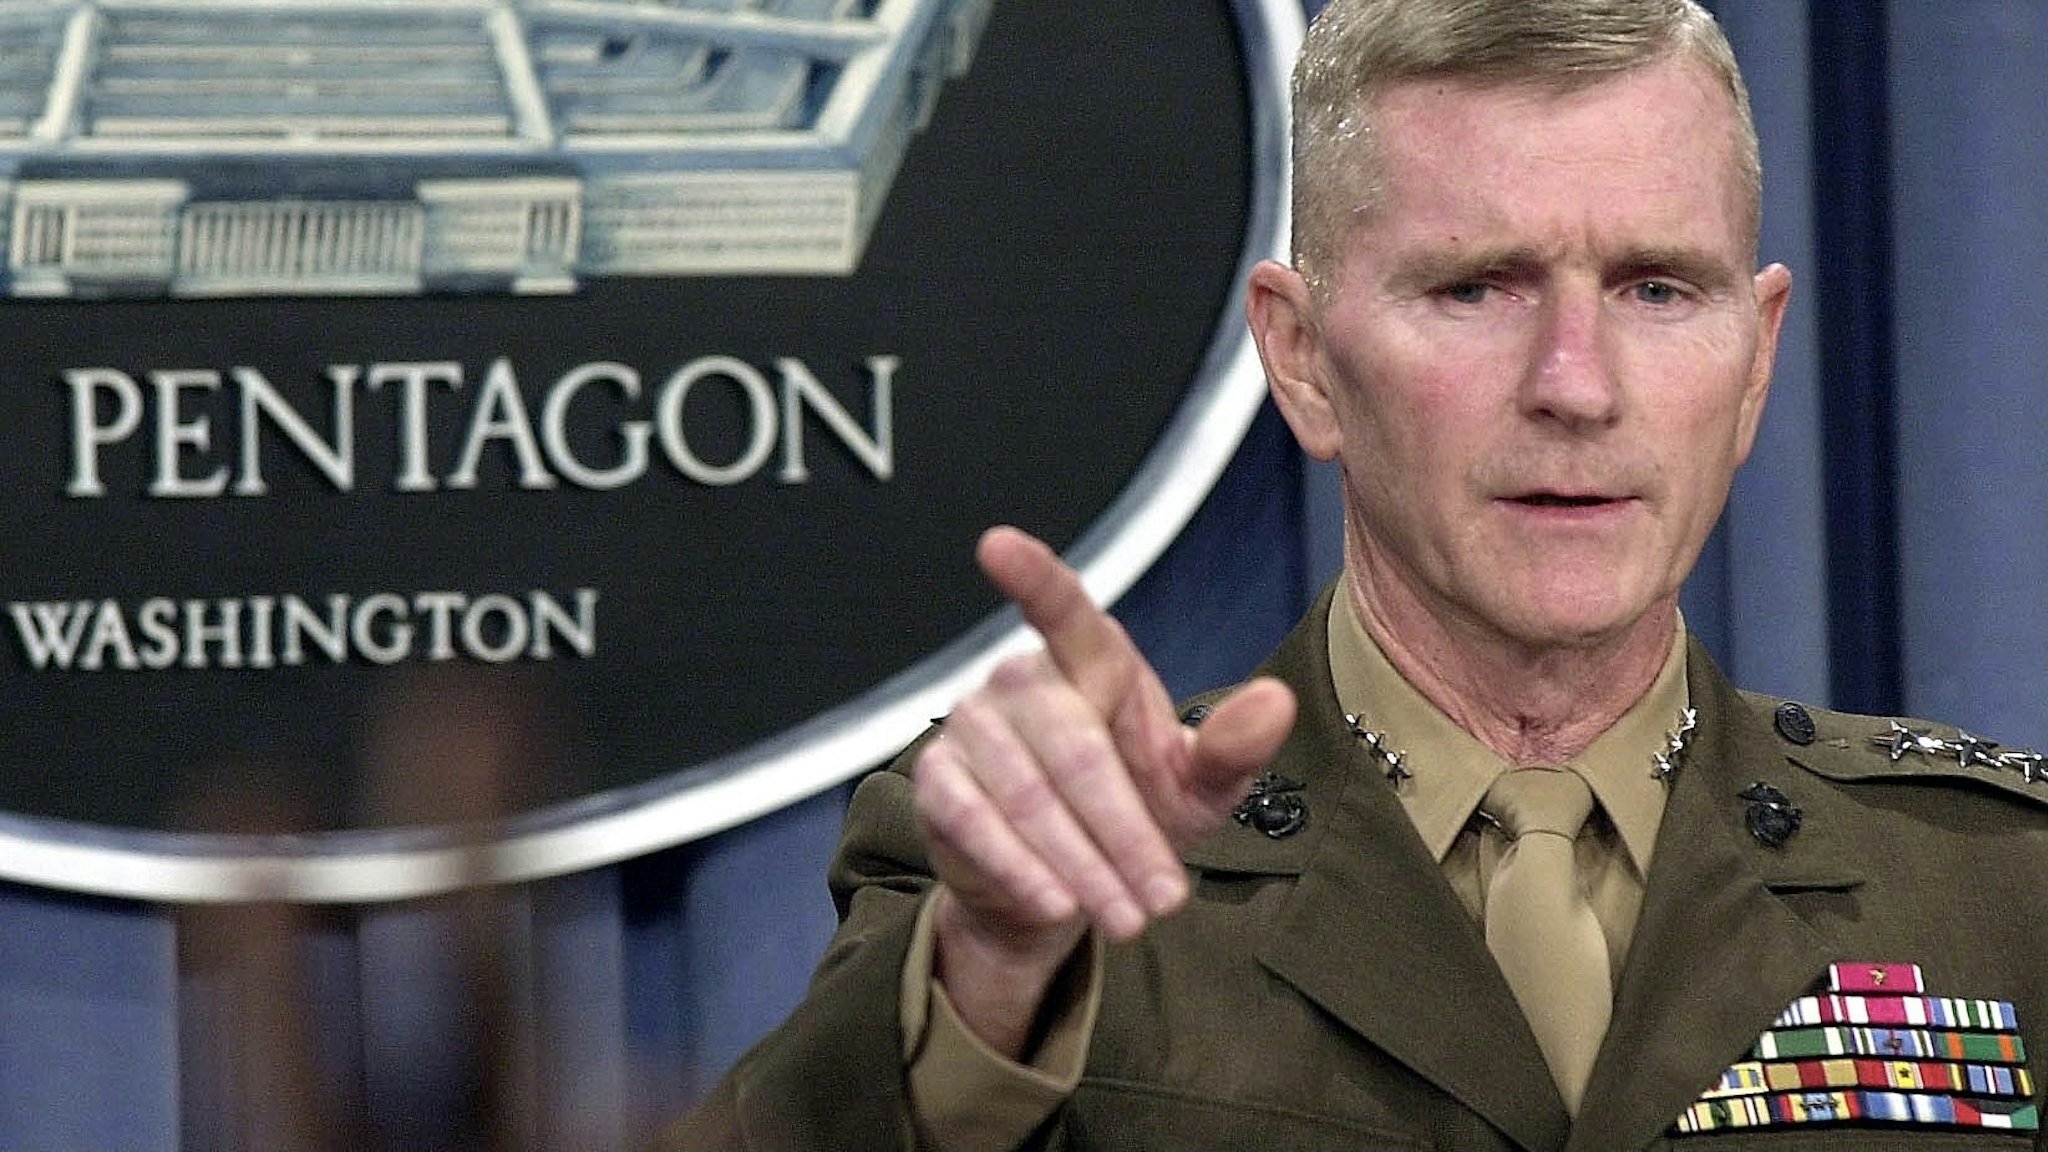 WASHINGTON, UNITED STATES: Lt. General Gregory Newbold,director of operations at the Pentagon's military joint staff, conducts an operational briefing 16 October 2001 at the Pentagon, in Washington DC. Newbold said US forces used more than 100 planes in 15 October bombing raids, a record in the air campaign against targets in Afghanistan. AFP PHOTO Joyce NALTCHAYAN (Photo credit should read JOYCE NALTCHAYAN/AFP via Getty Images)